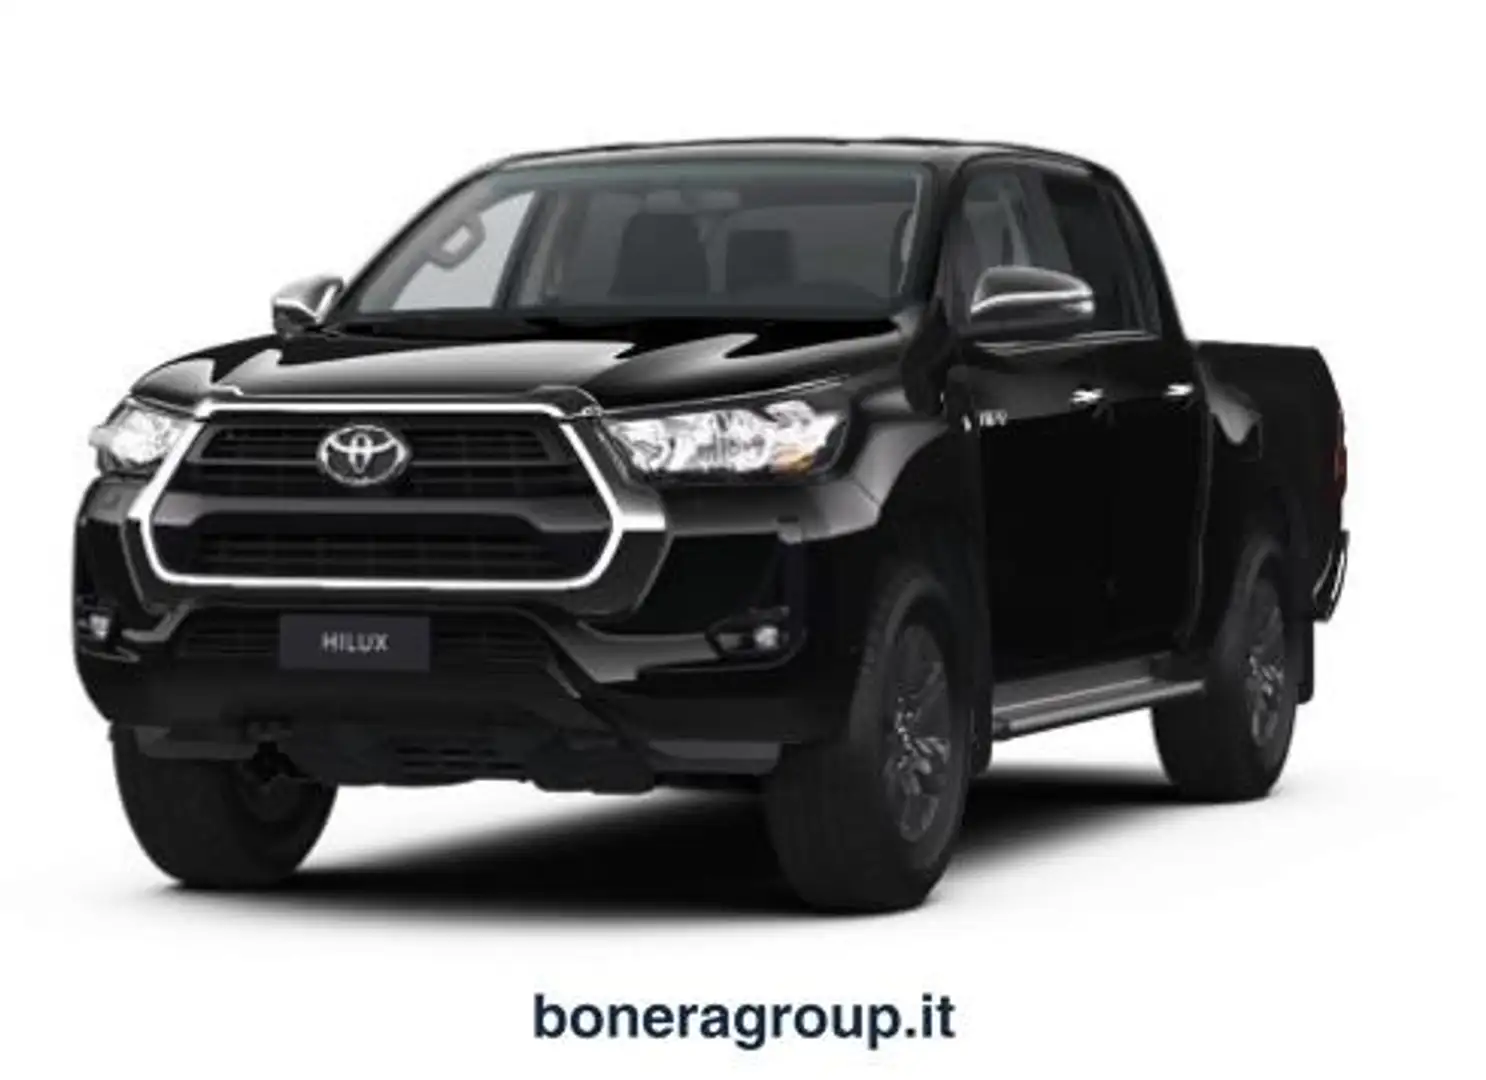 Toyota Hilux 2.4 d-4d double cab Lounge 4wd crna - 2